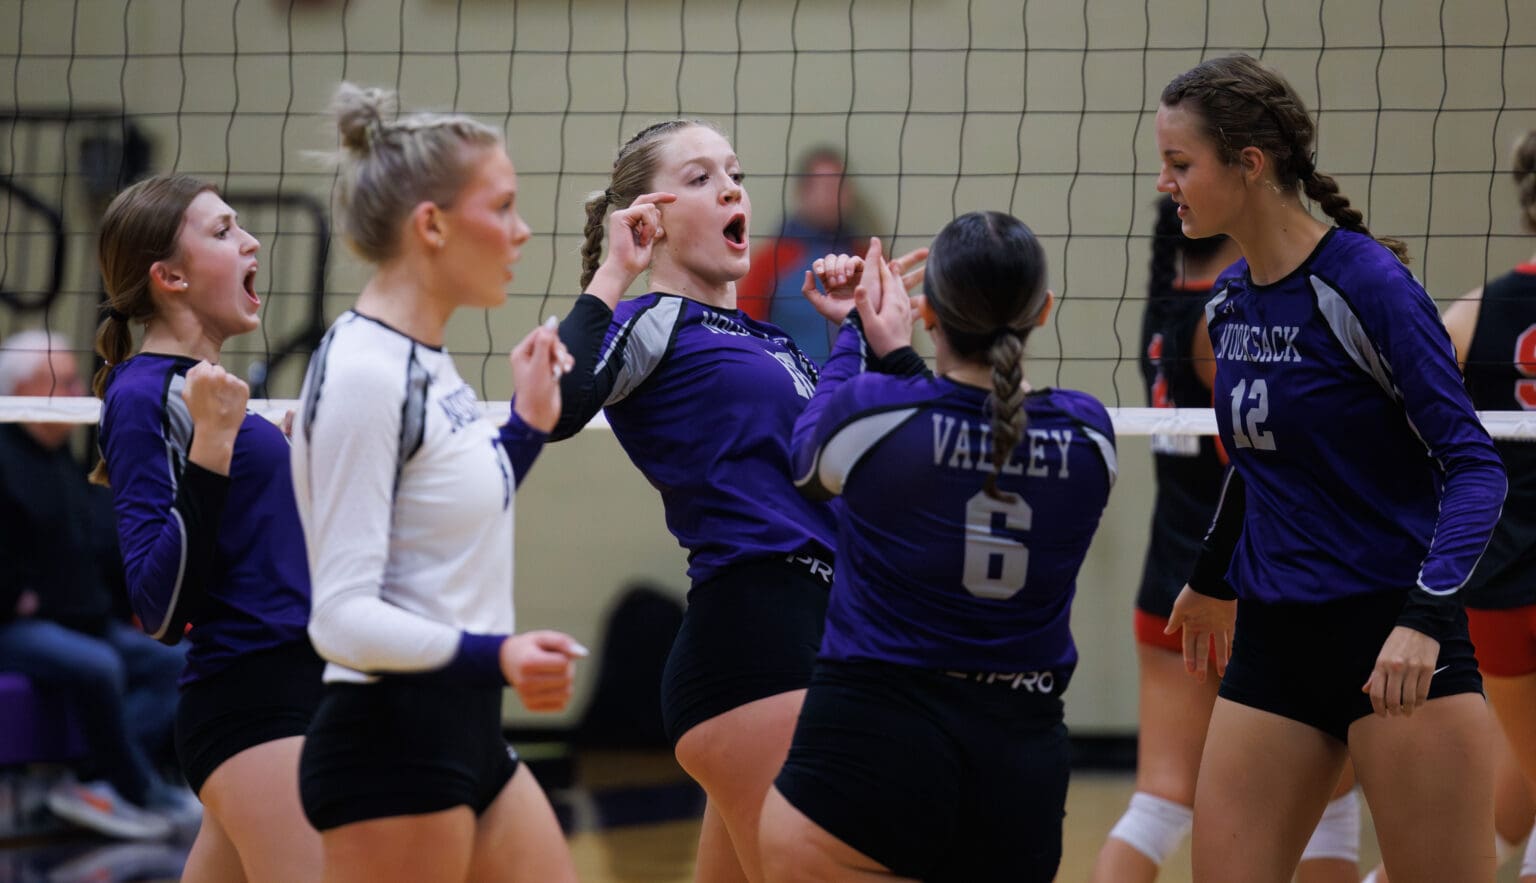 Nooksack Valley’s Lainey Kimball, center, celebrates with teammates in a close huddle after scoring a point.